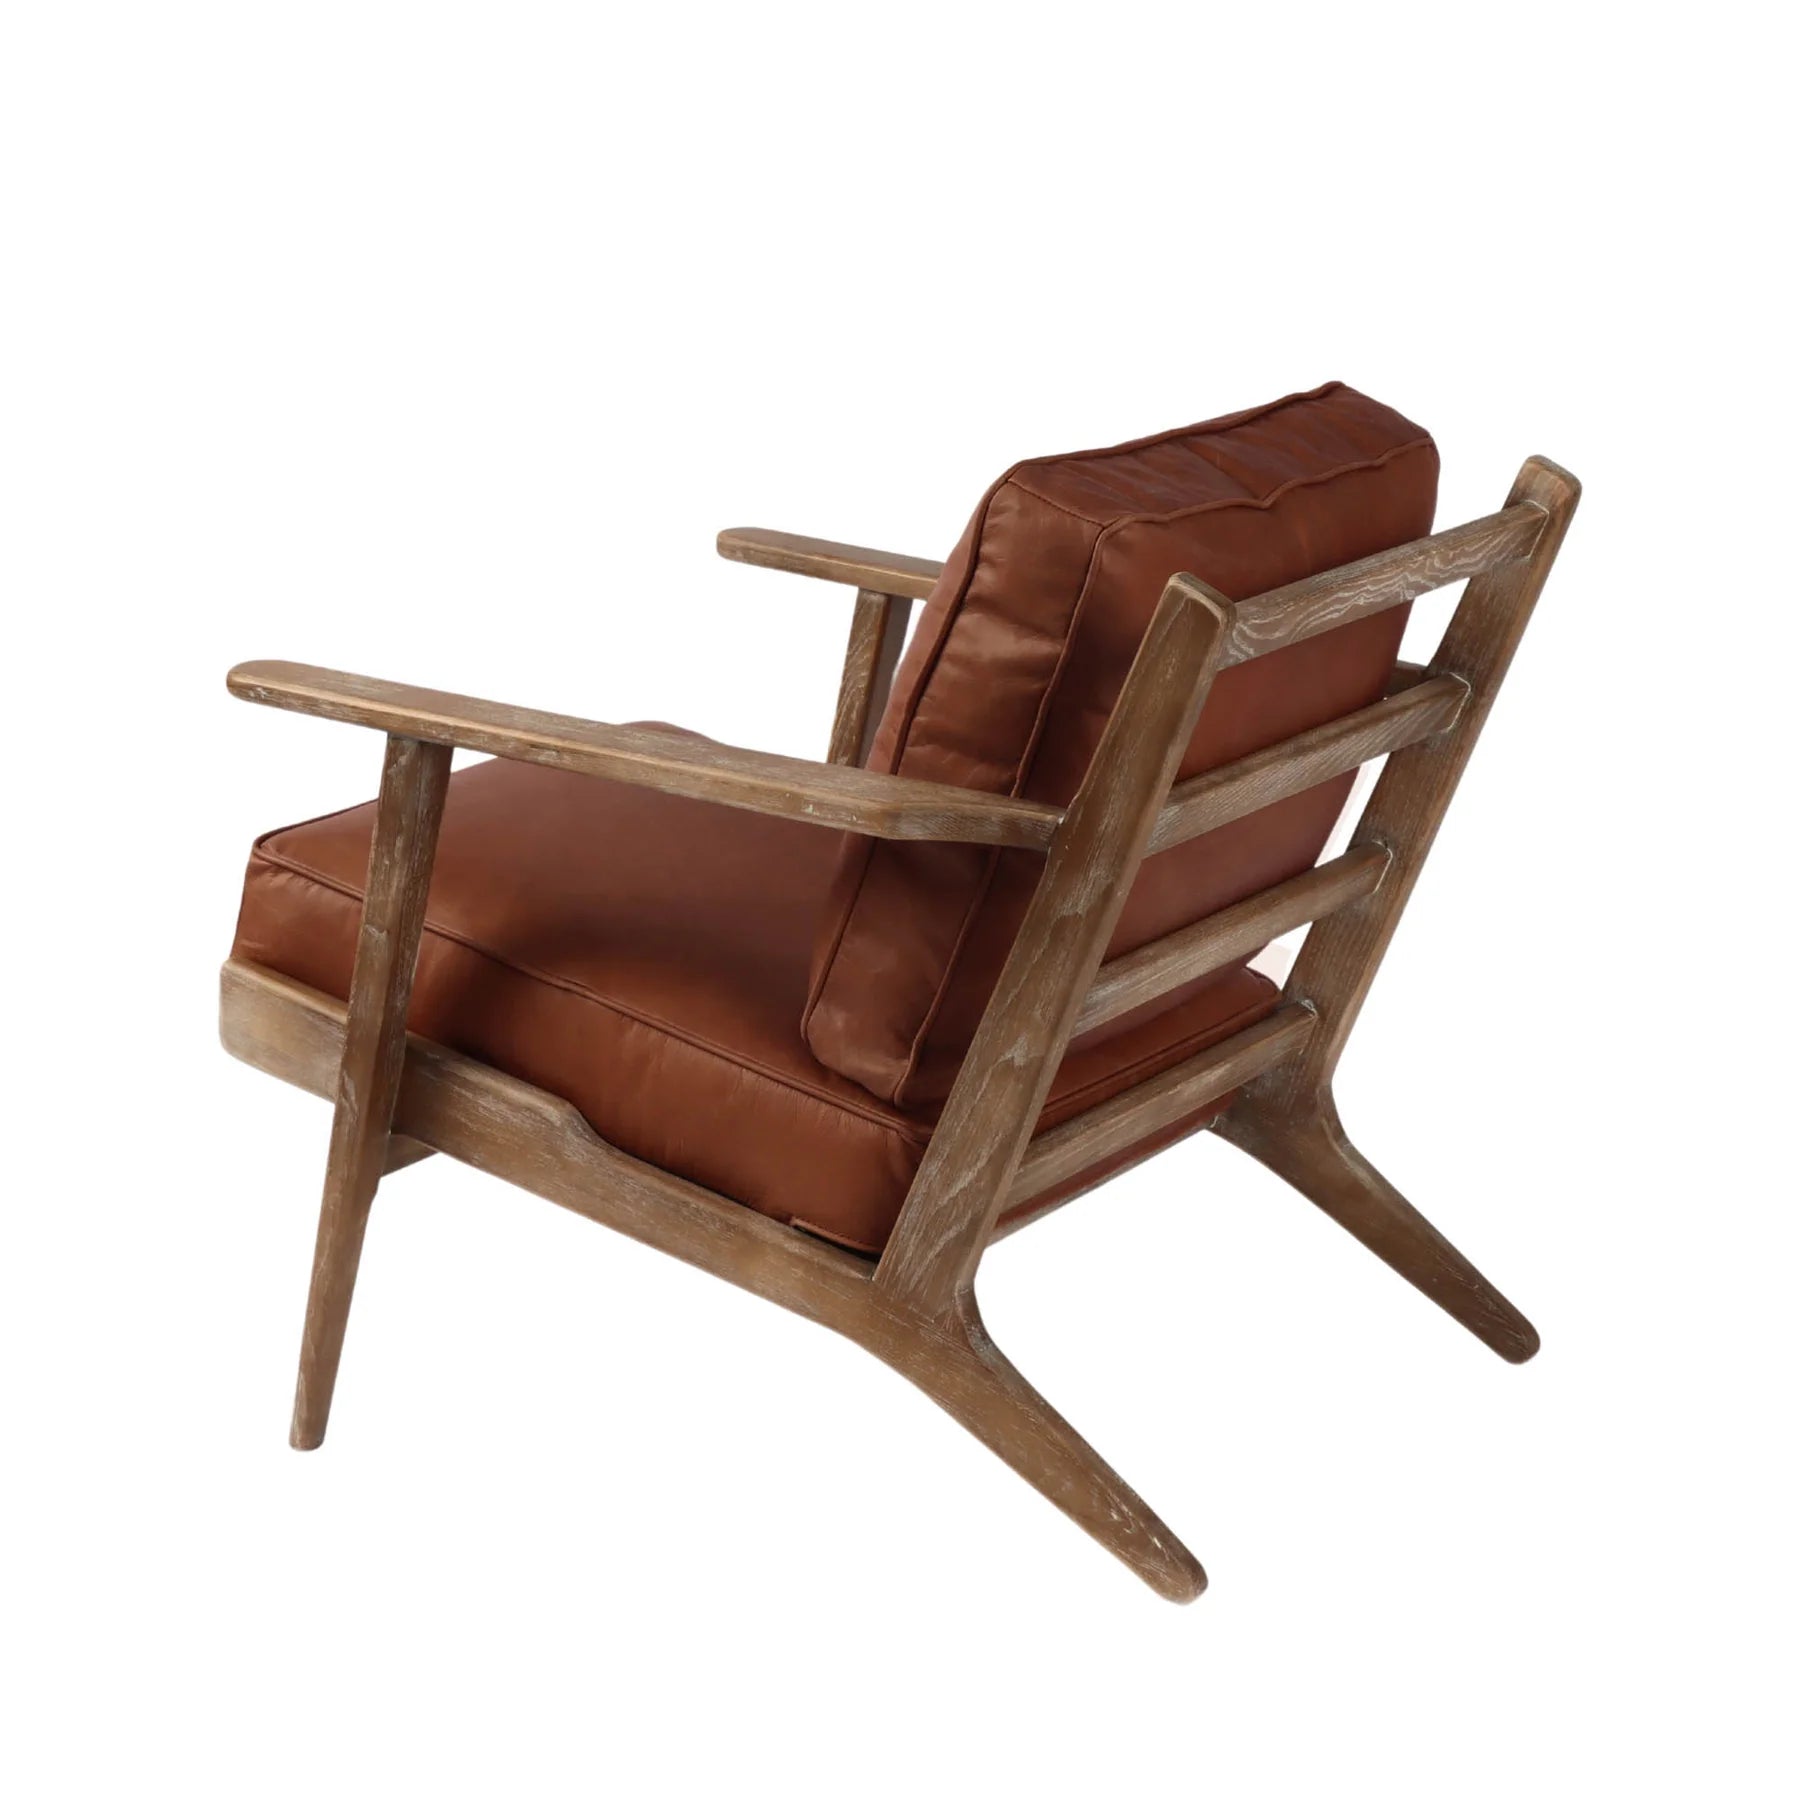 JUNIOR Leather Arm Chair